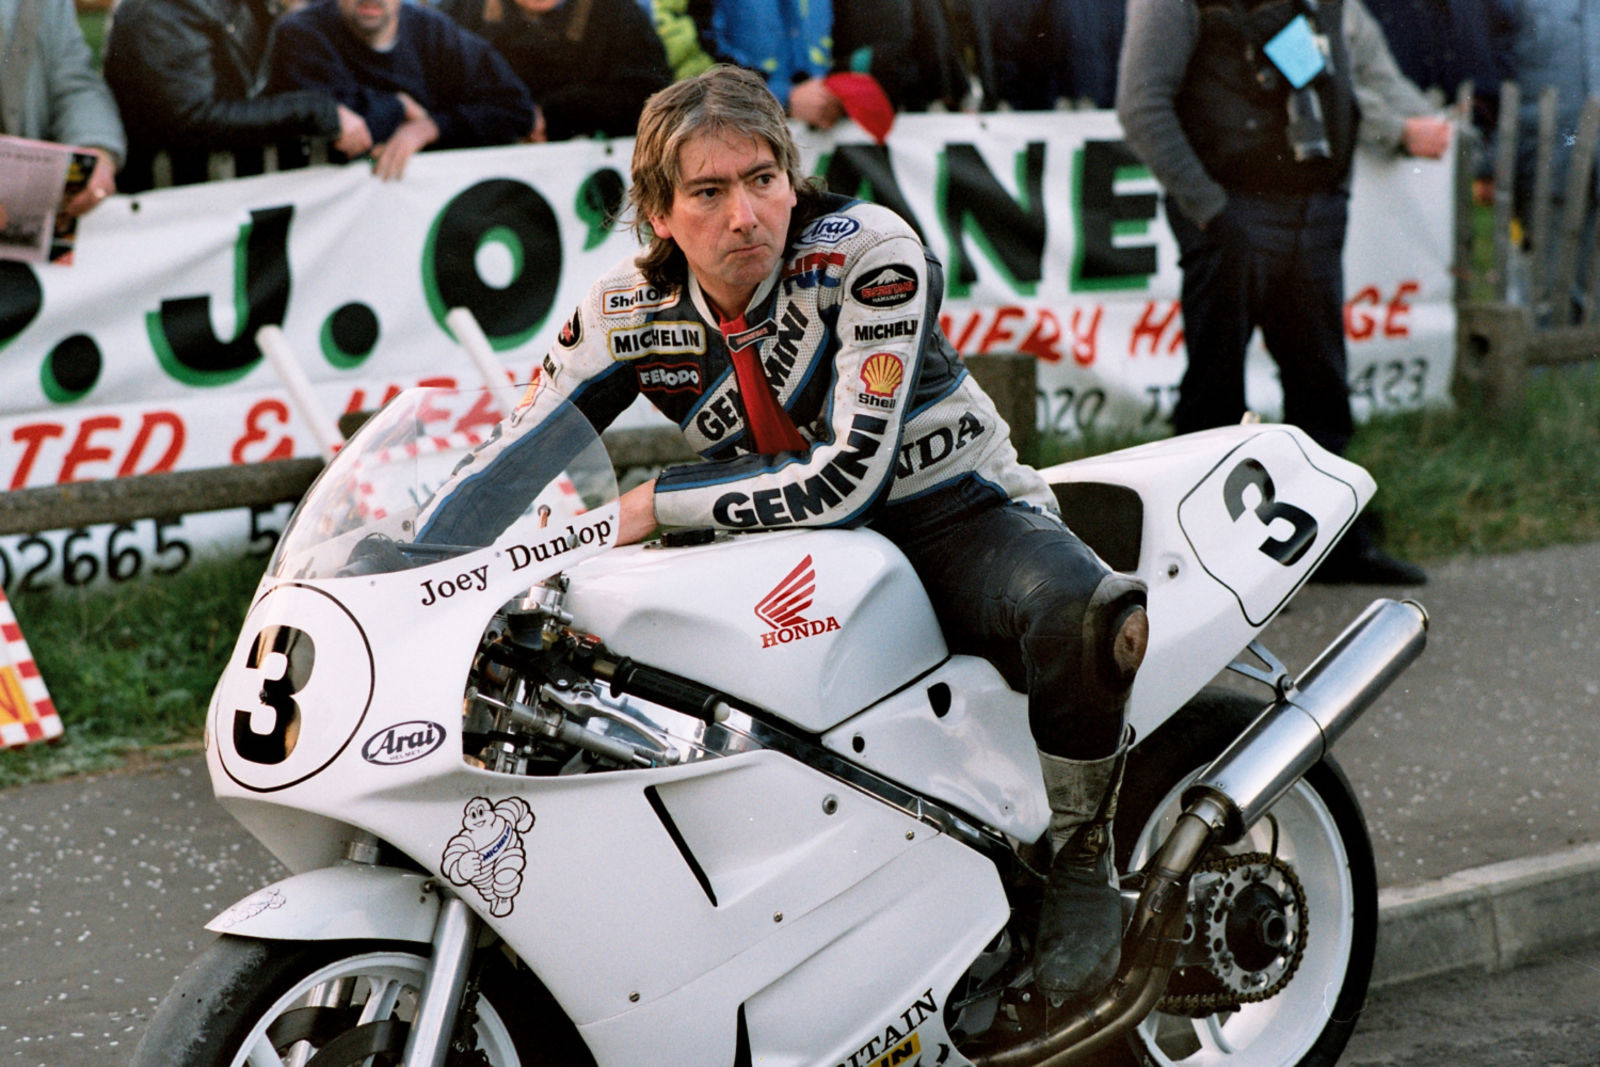 Greatest Motorcycle Rider: Joey Dunlop